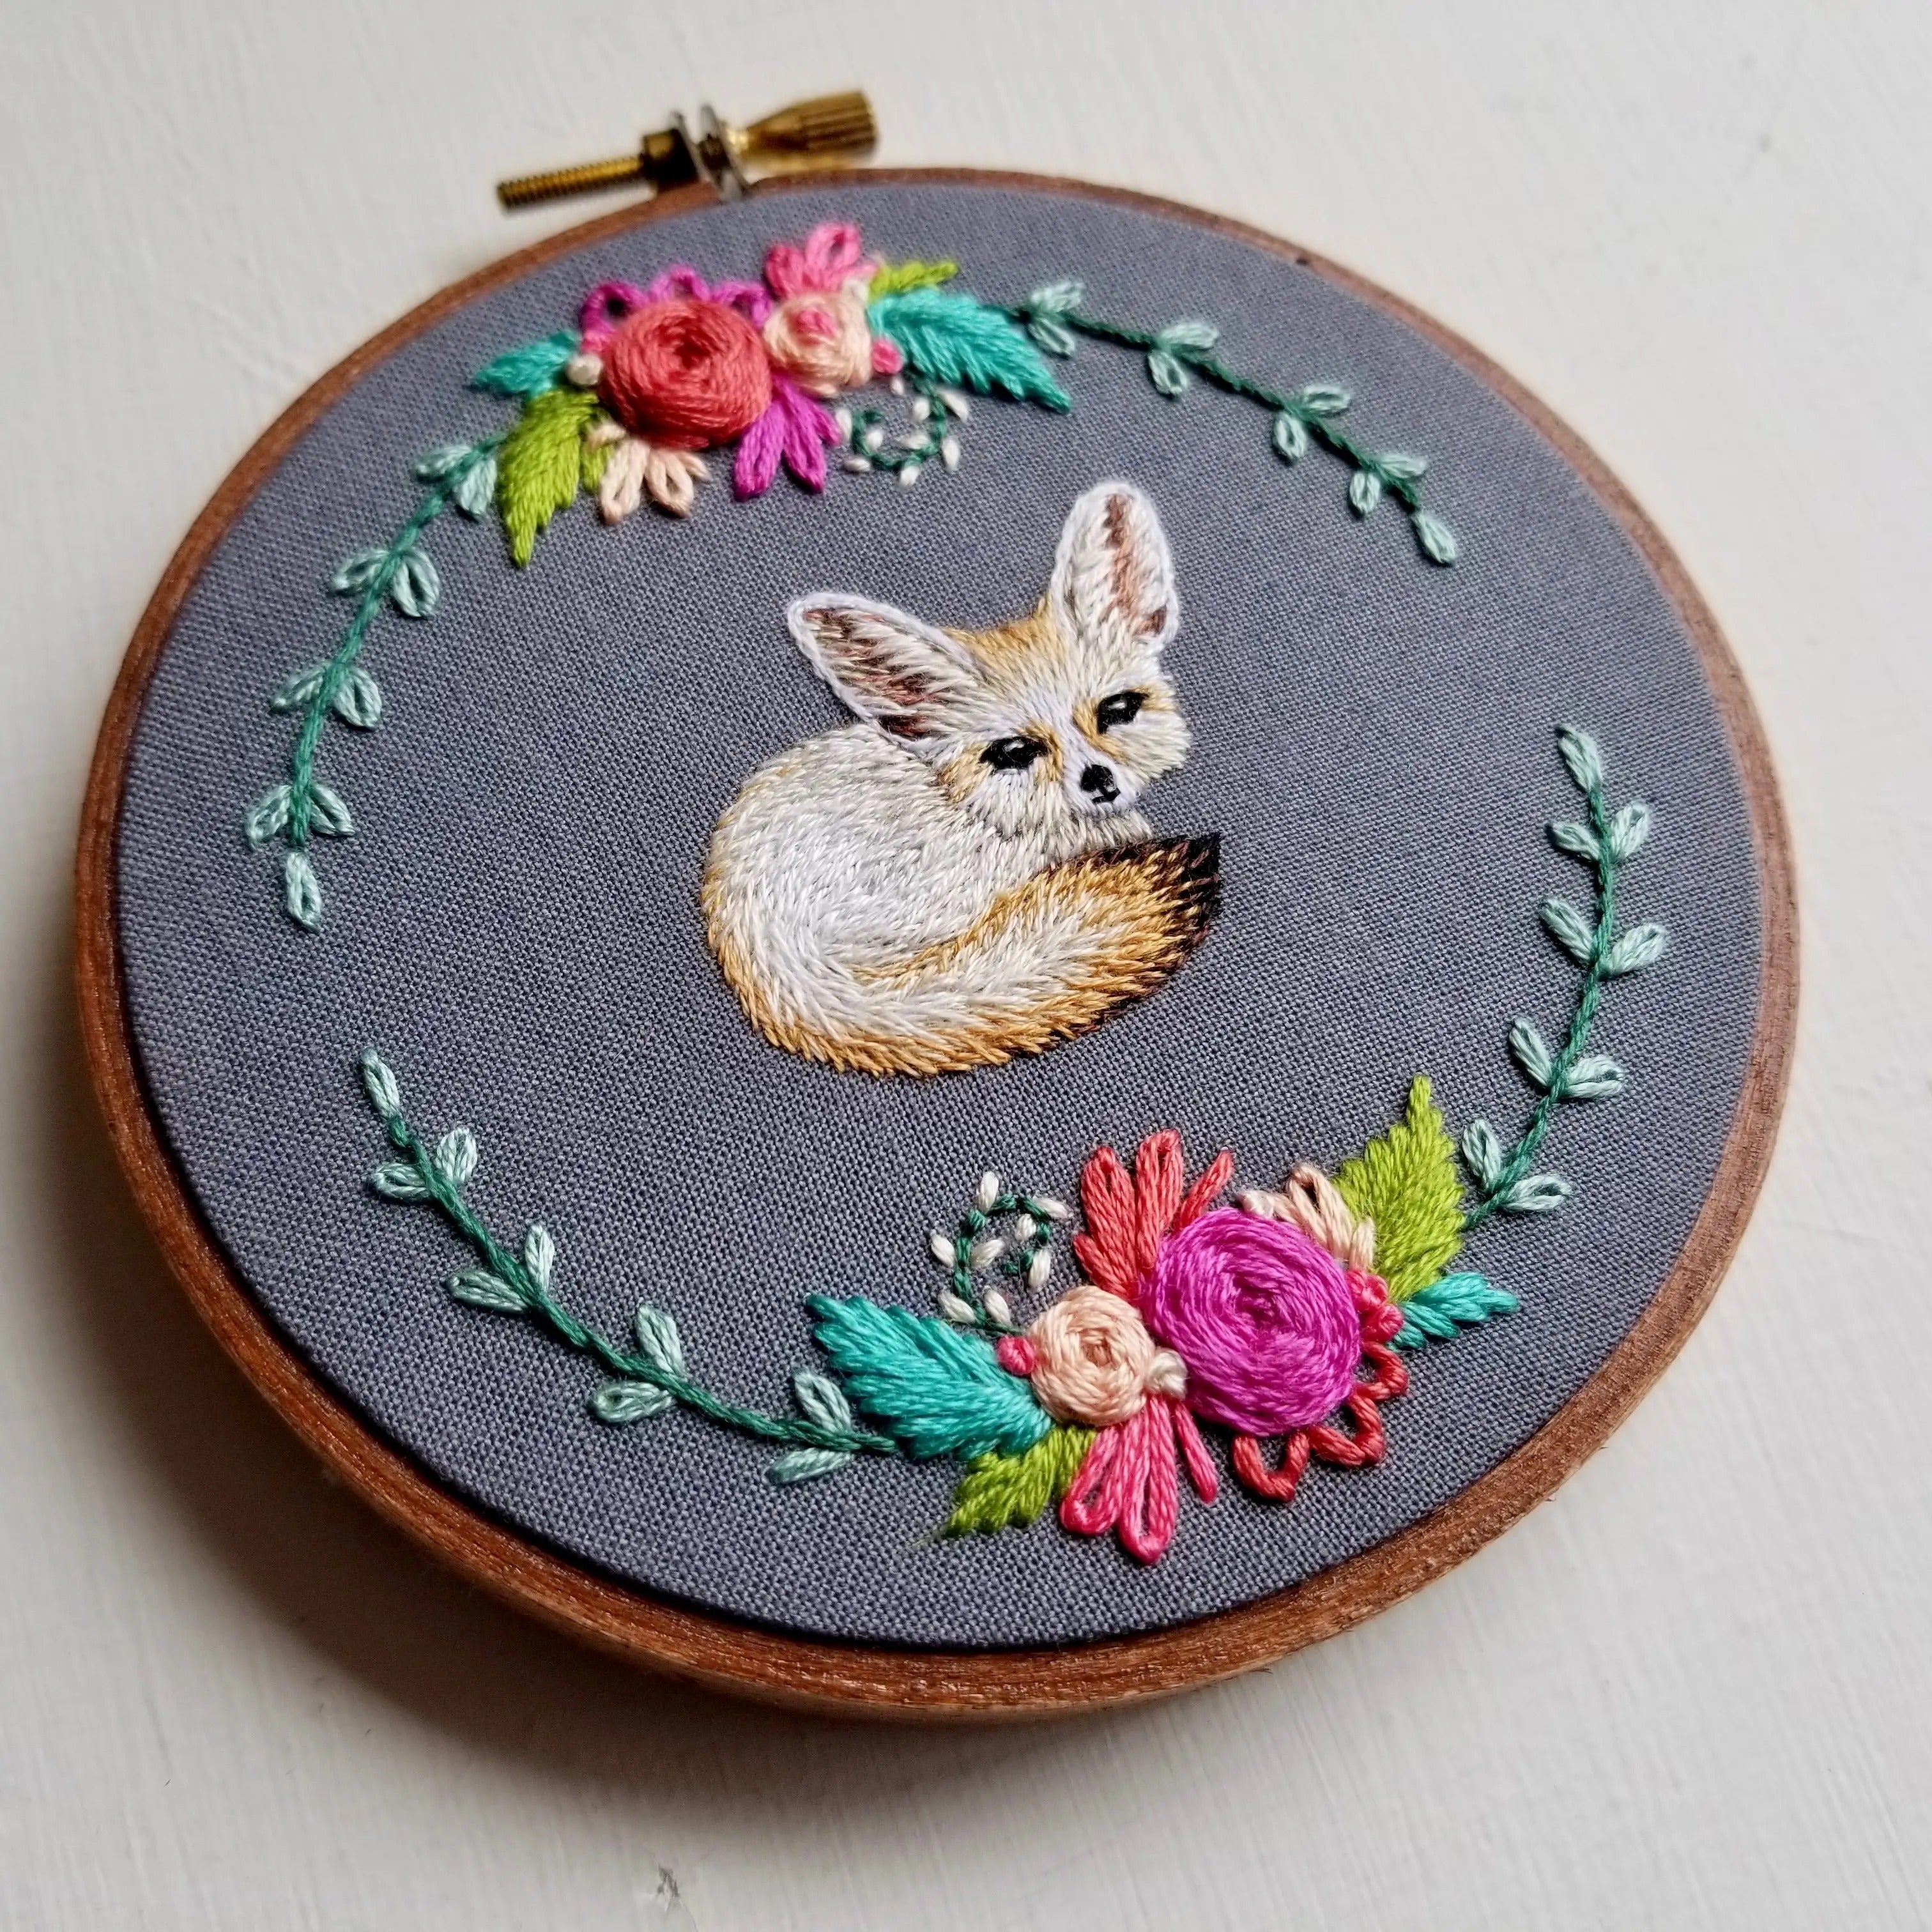 Jessica Long Embroidery Kit Fennec Fox - The Websters